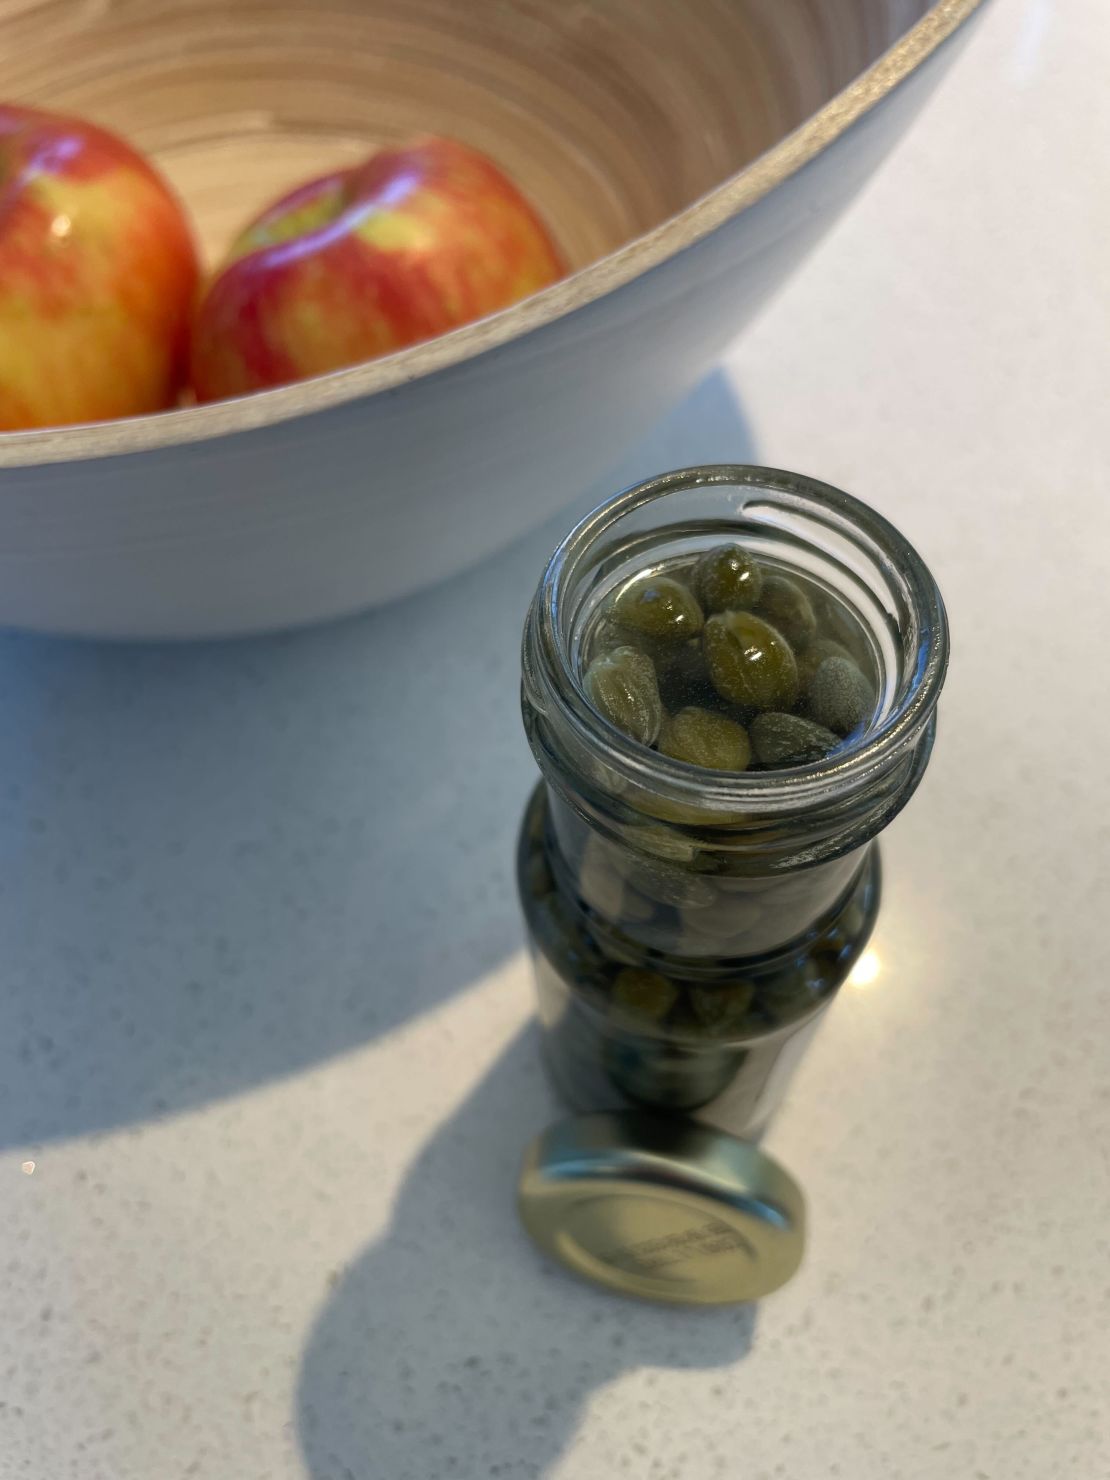 Popular ways to extract capers, according to Reddit: Use an old-fashioned potato peeler, chef’s tweezers, a tiny melon baller or a wide-mouth boba straw.